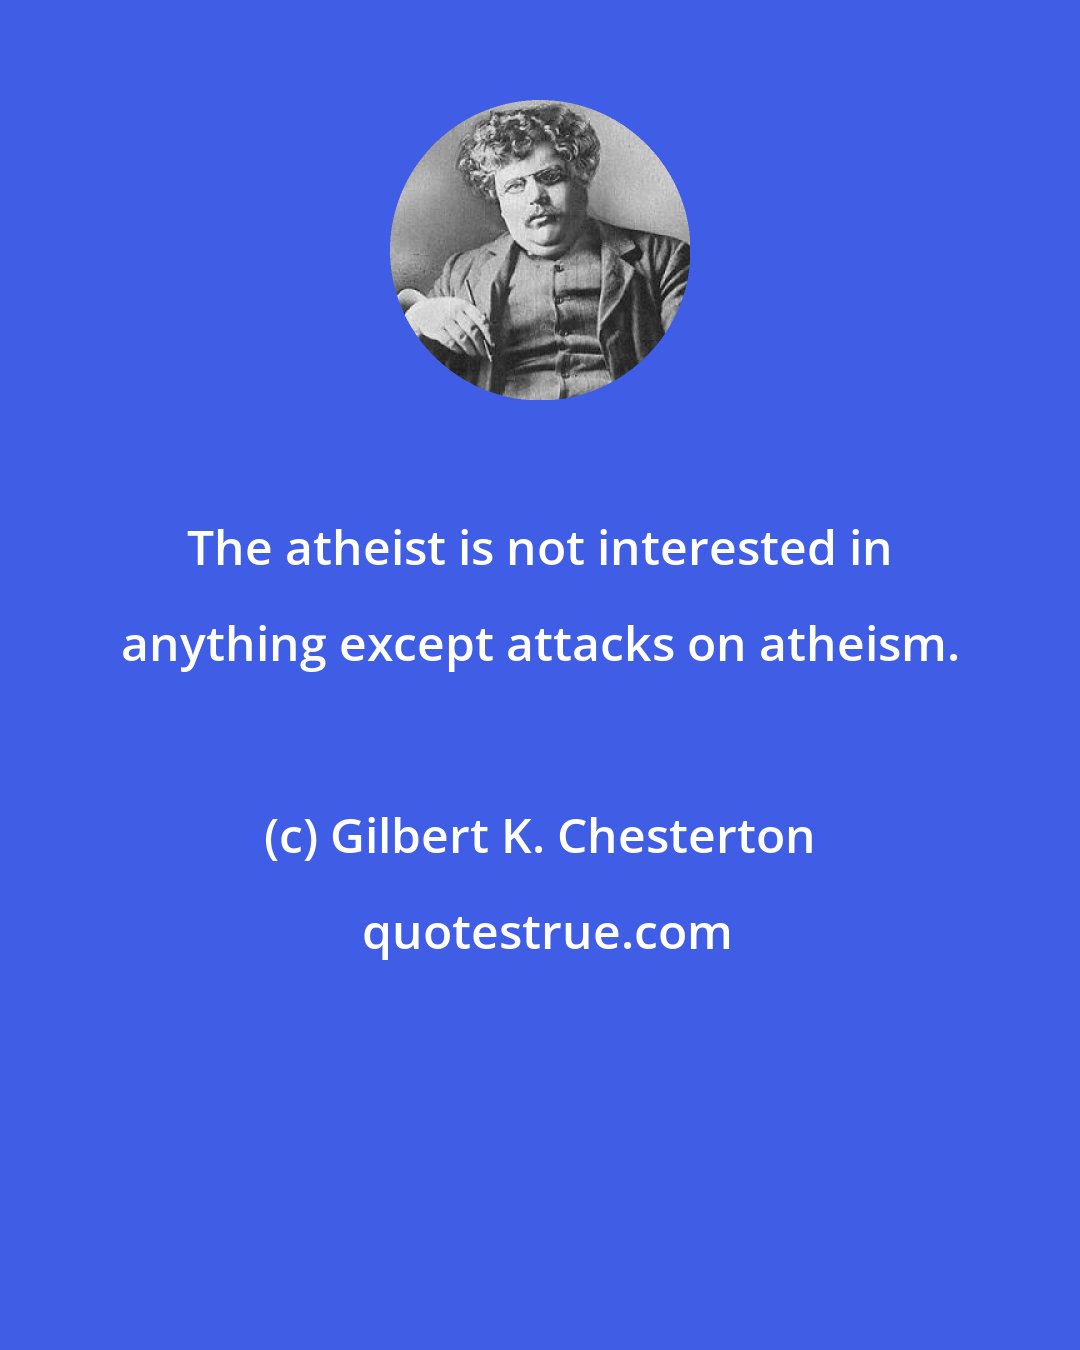 Gilbert K. Chesterton: The atheist is not interested in anything except attacks on atheism.